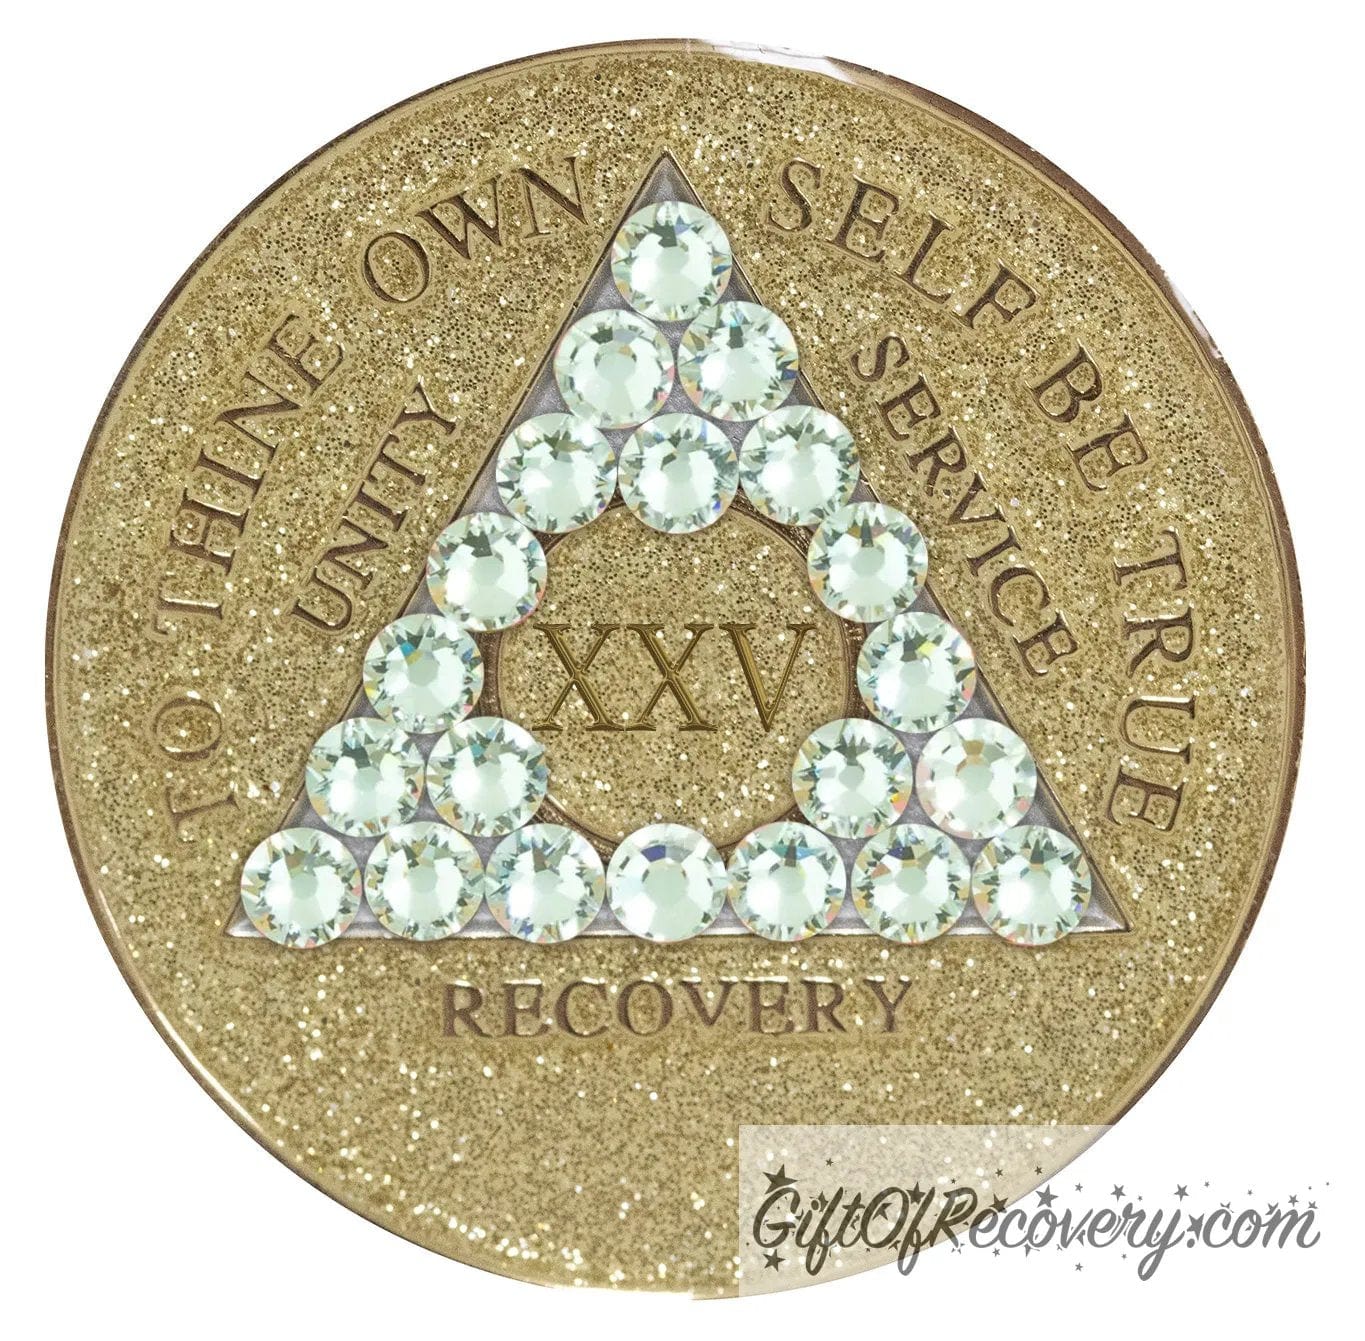 25 year AA medallion in gold glitter with twenty-one genuine diamond CZ crystals in the shape of a triangle, symbolizing transformation under pressure, to thine own self be true, unity, service, recovery and roman numeral are embossed with 14k gold-plated brass along with outer rim, sealed in a chip and scratch-resistant resin giving it a beautiful glossy look.